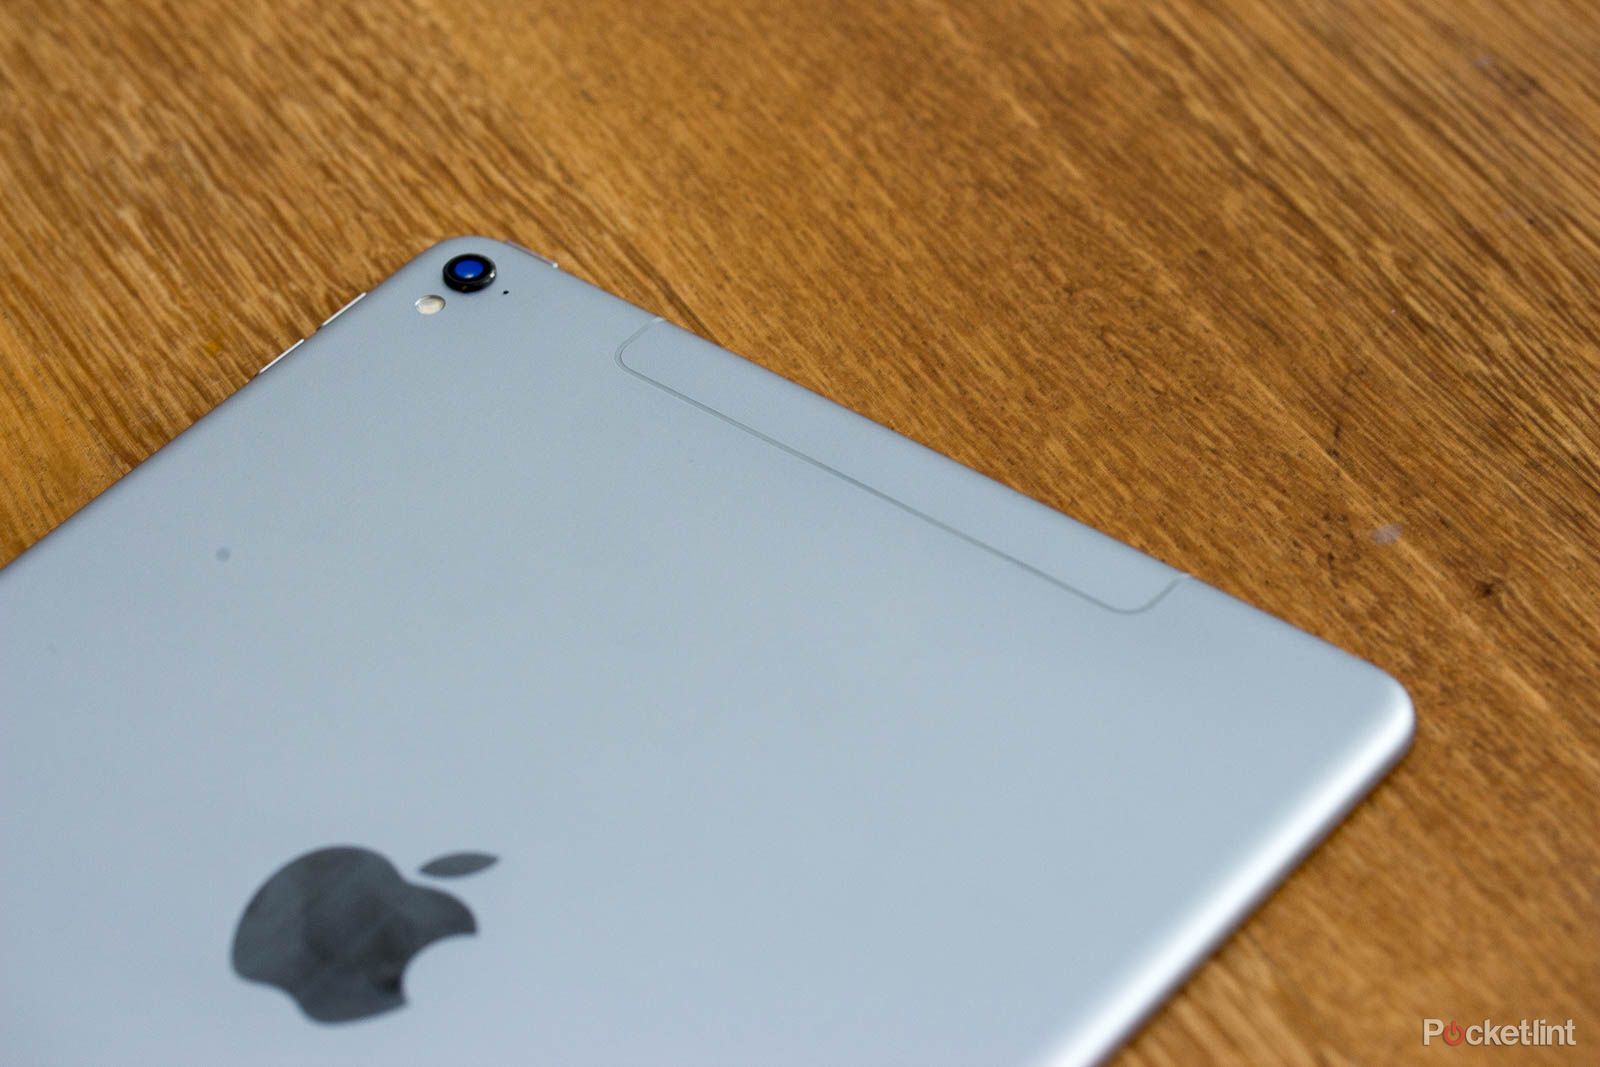 ipad pro 2 not expected until may or even june says report image 1